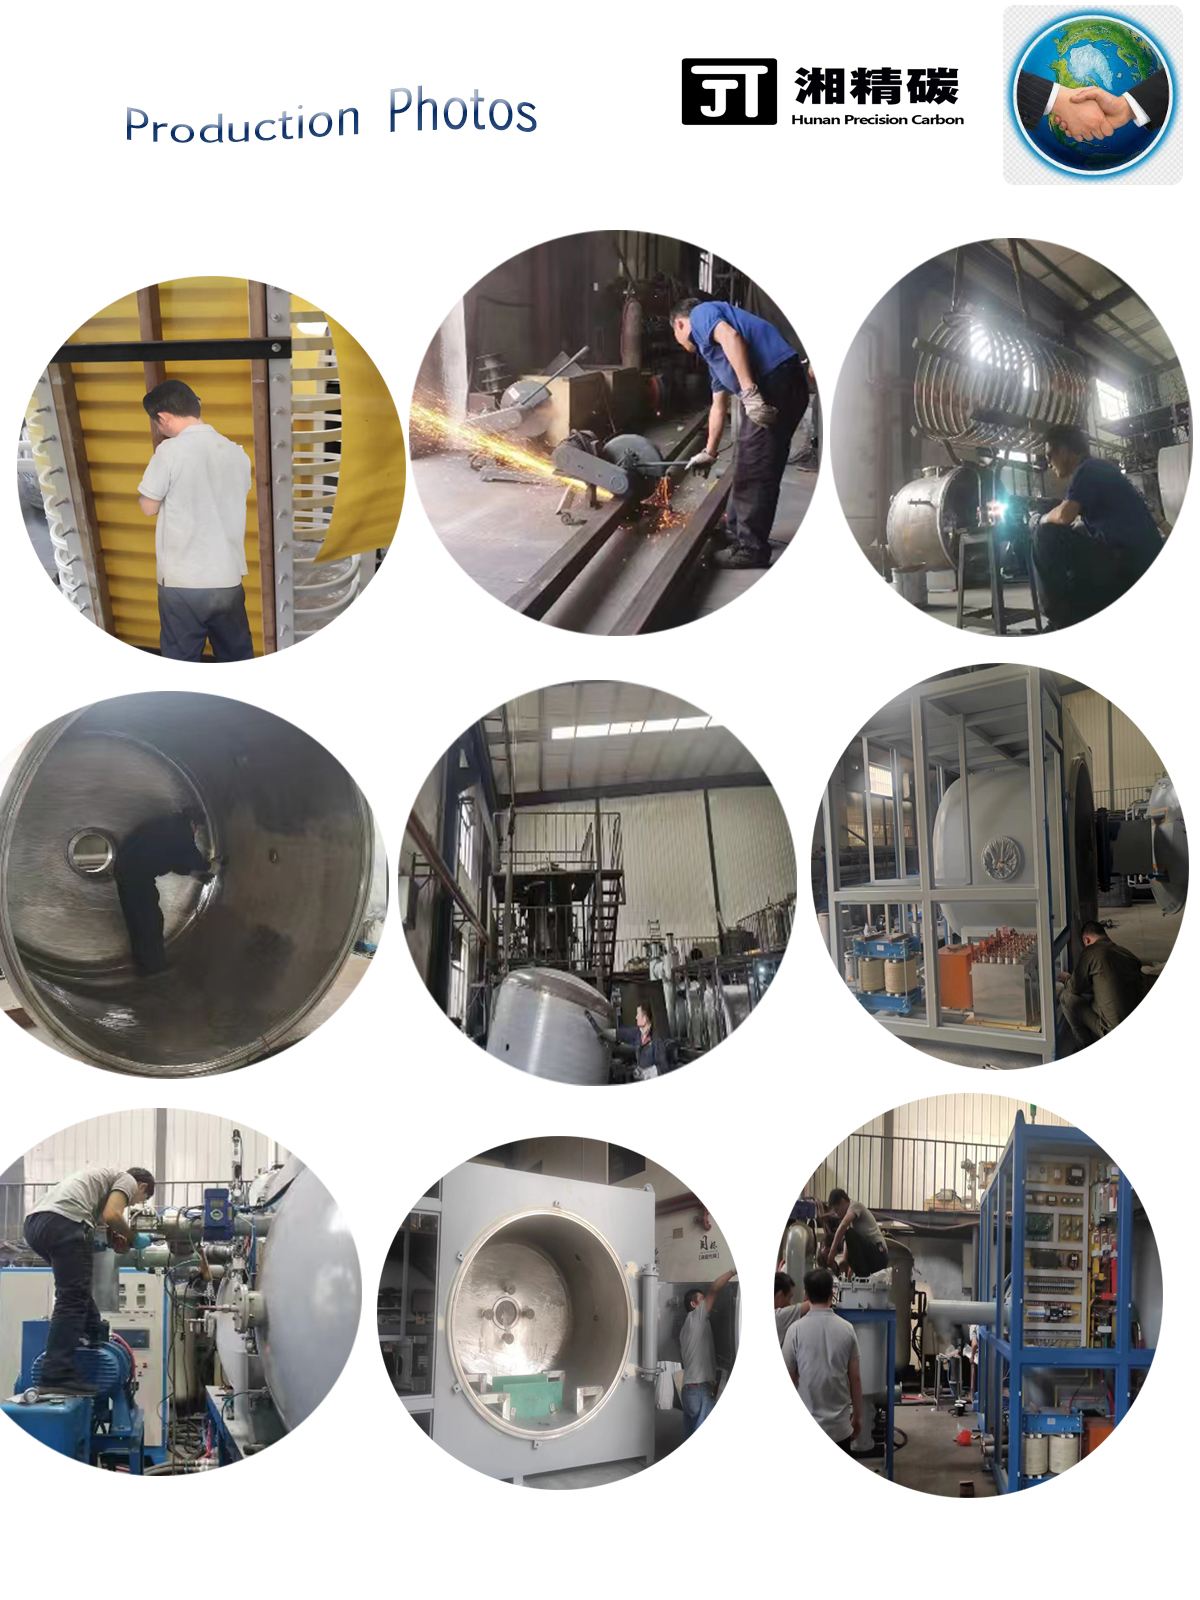 Vacuum Depositon furnace factory for Graphite, semiconductor devices, heat-resistant scour materials